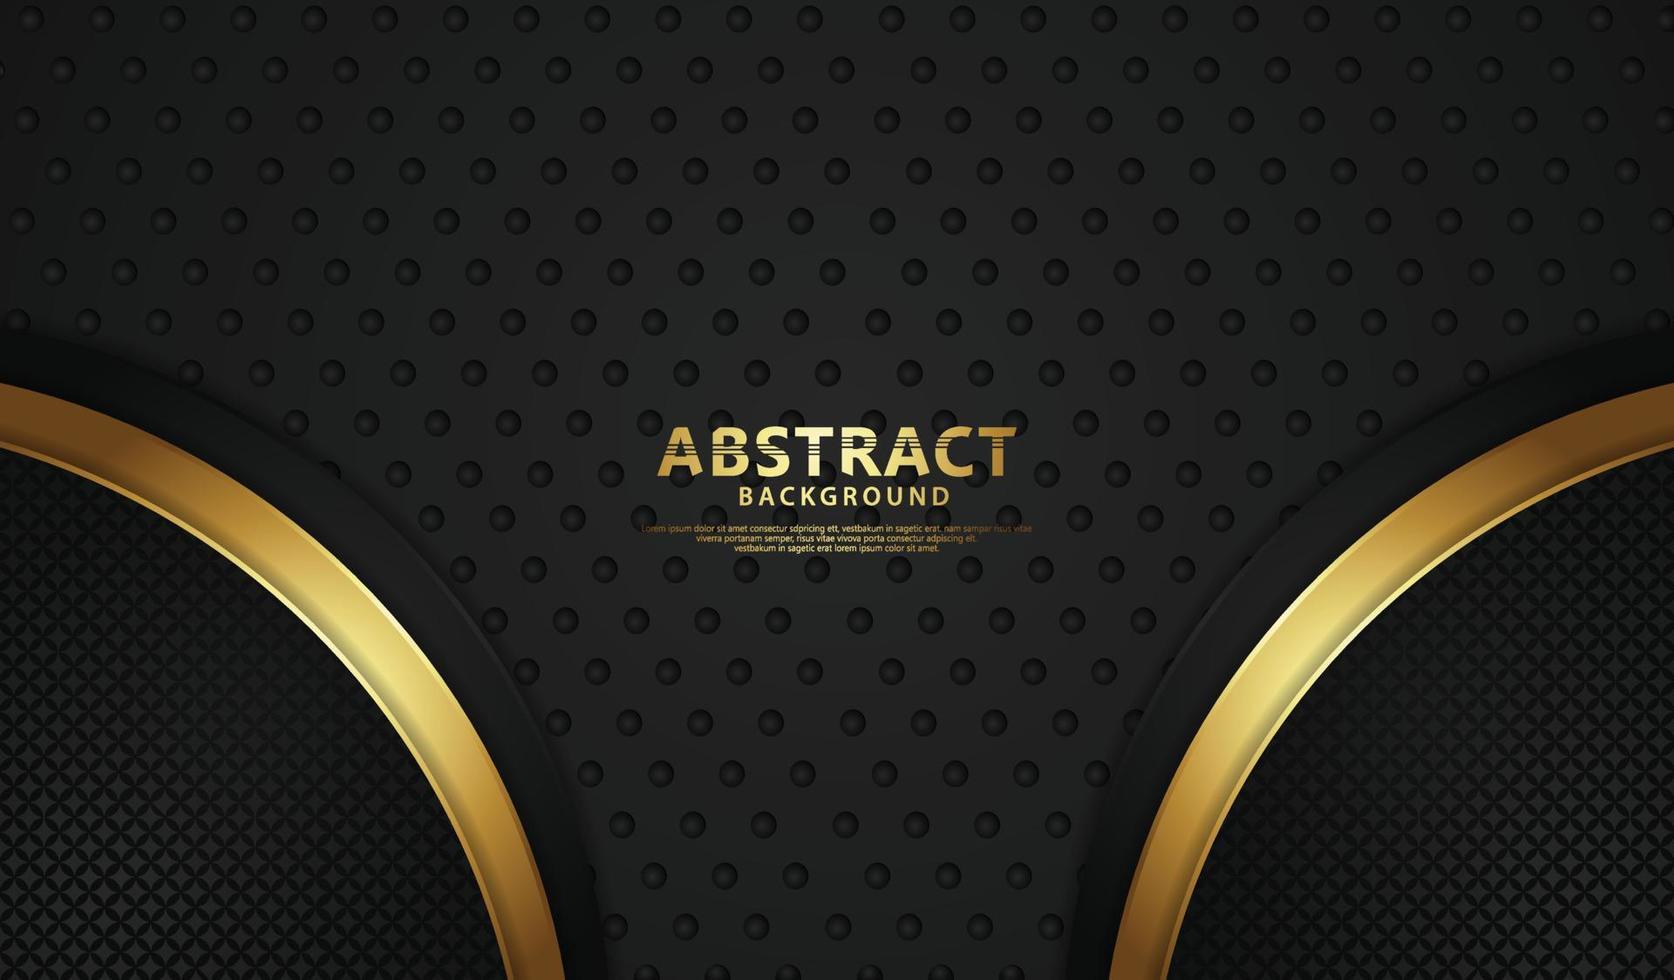 Luxury overlap layers abstract background with lines effect vector